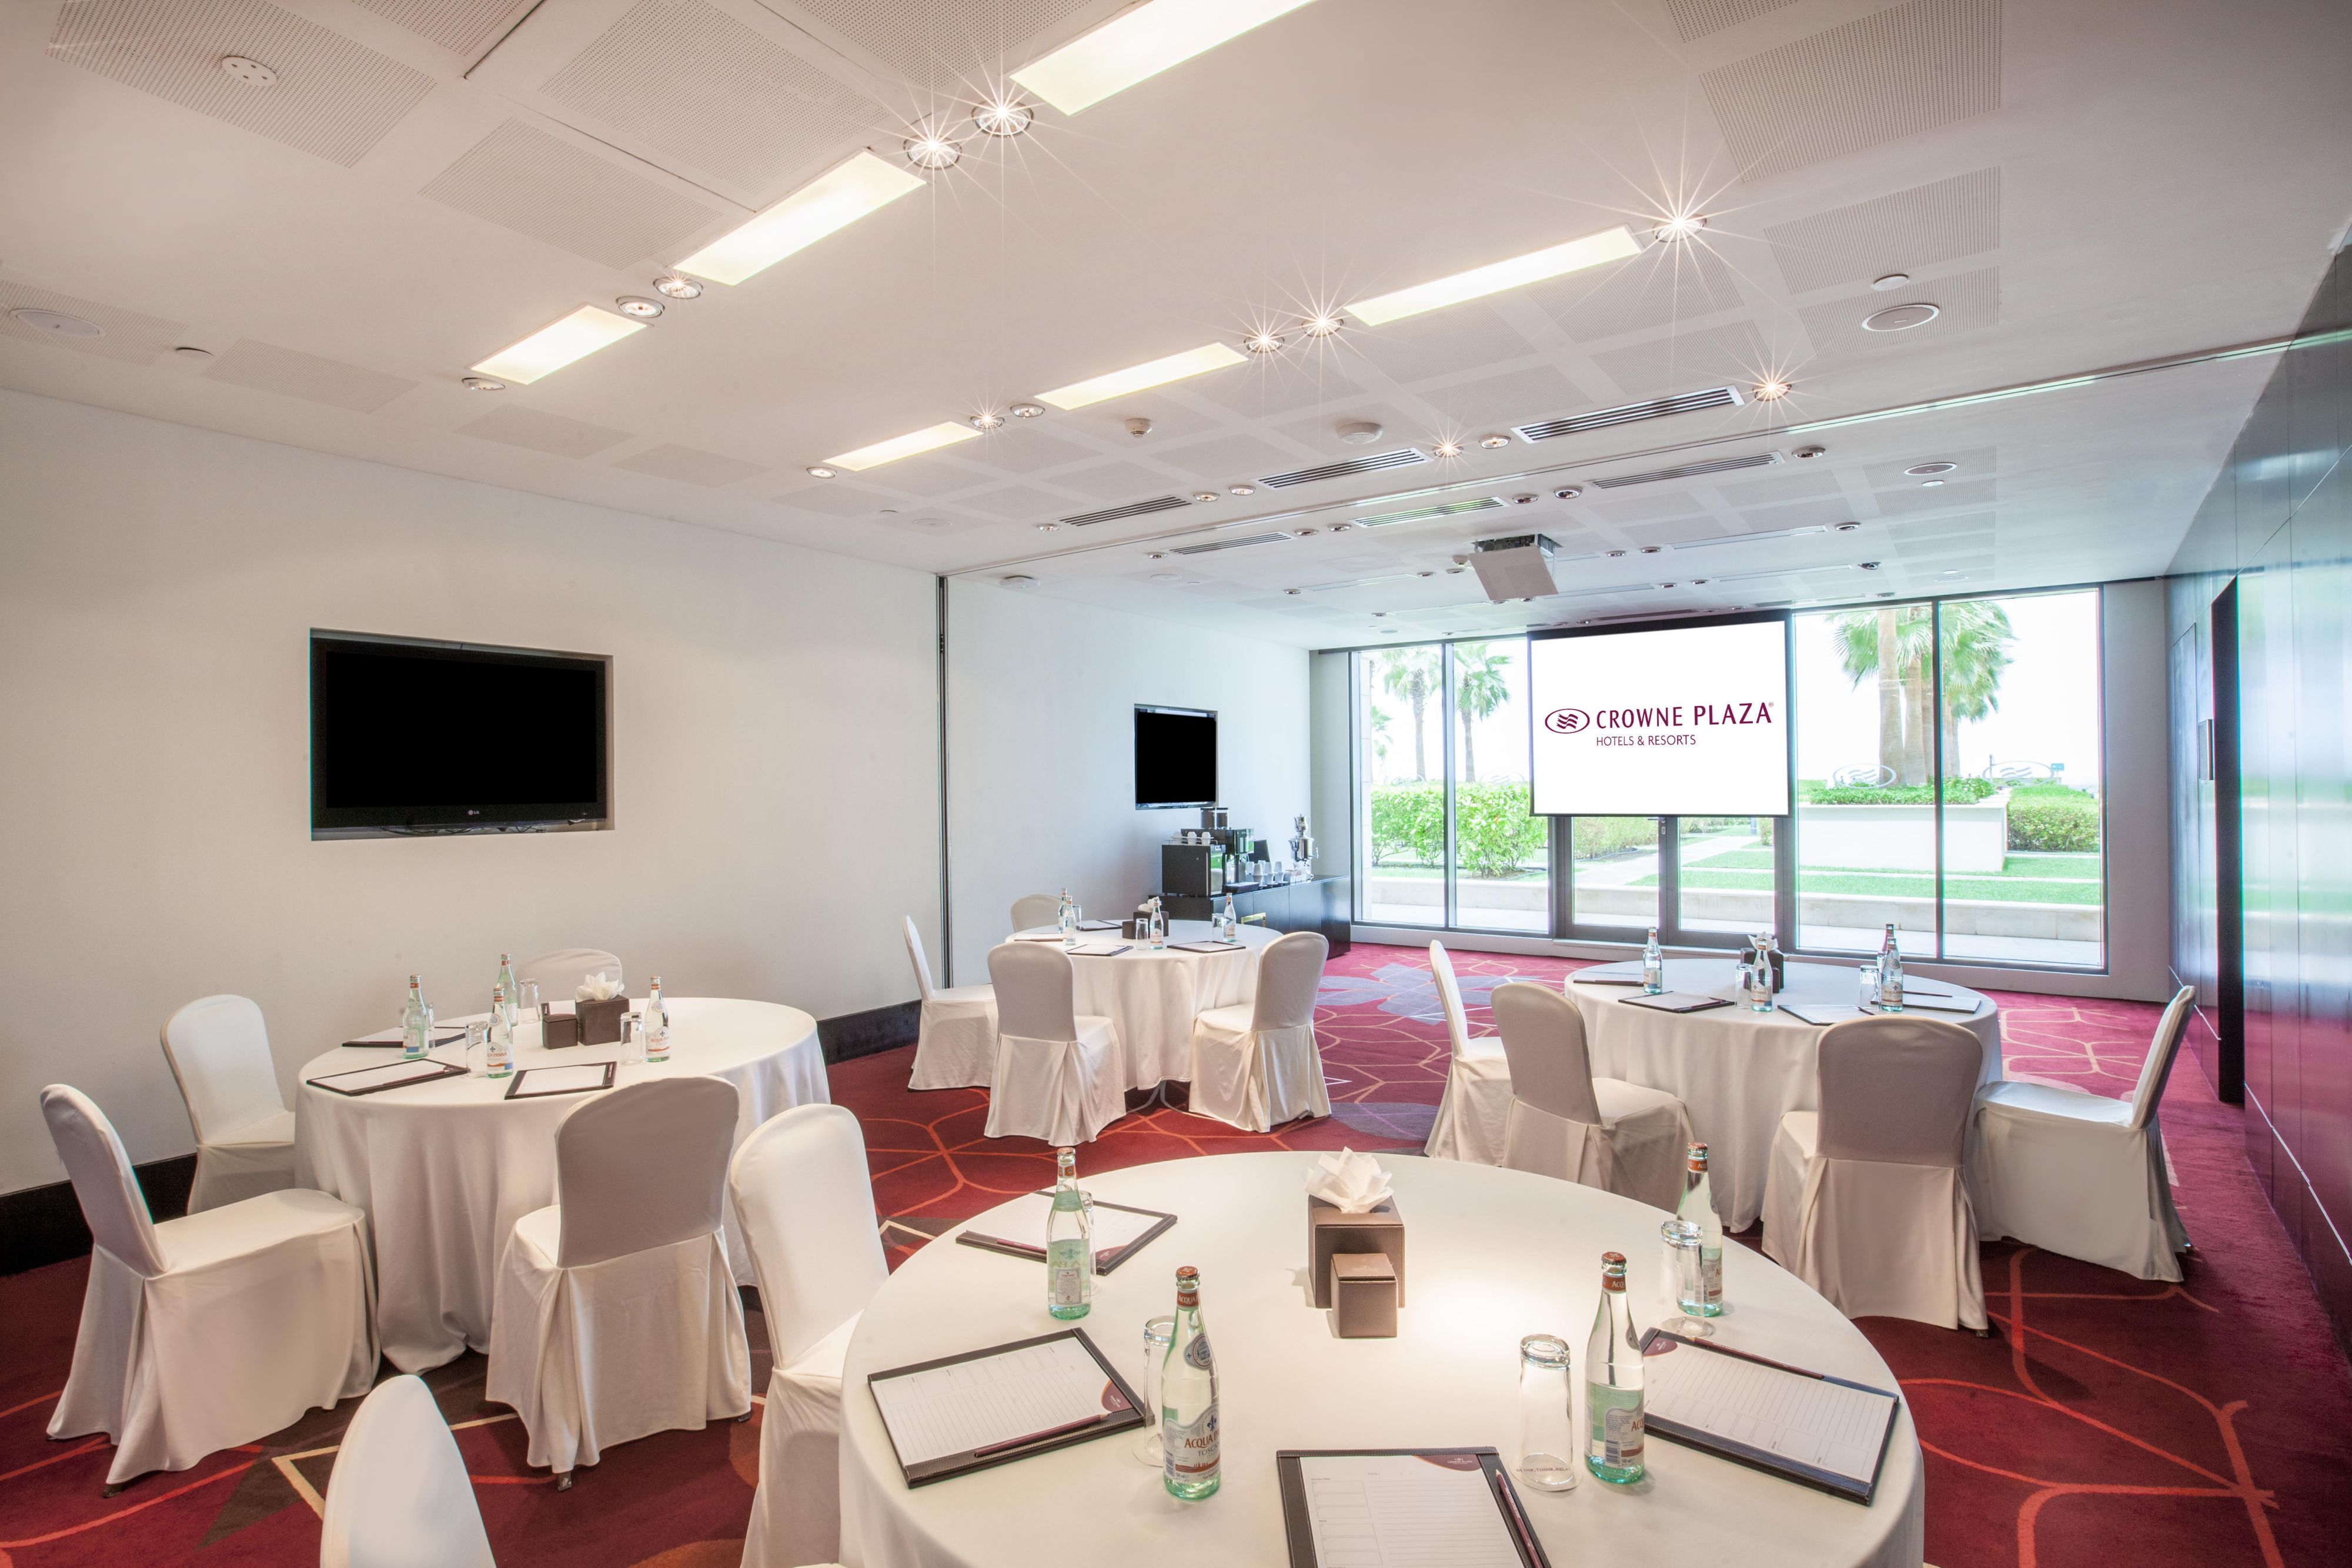 Have trainings that draw results in our meeting rooms